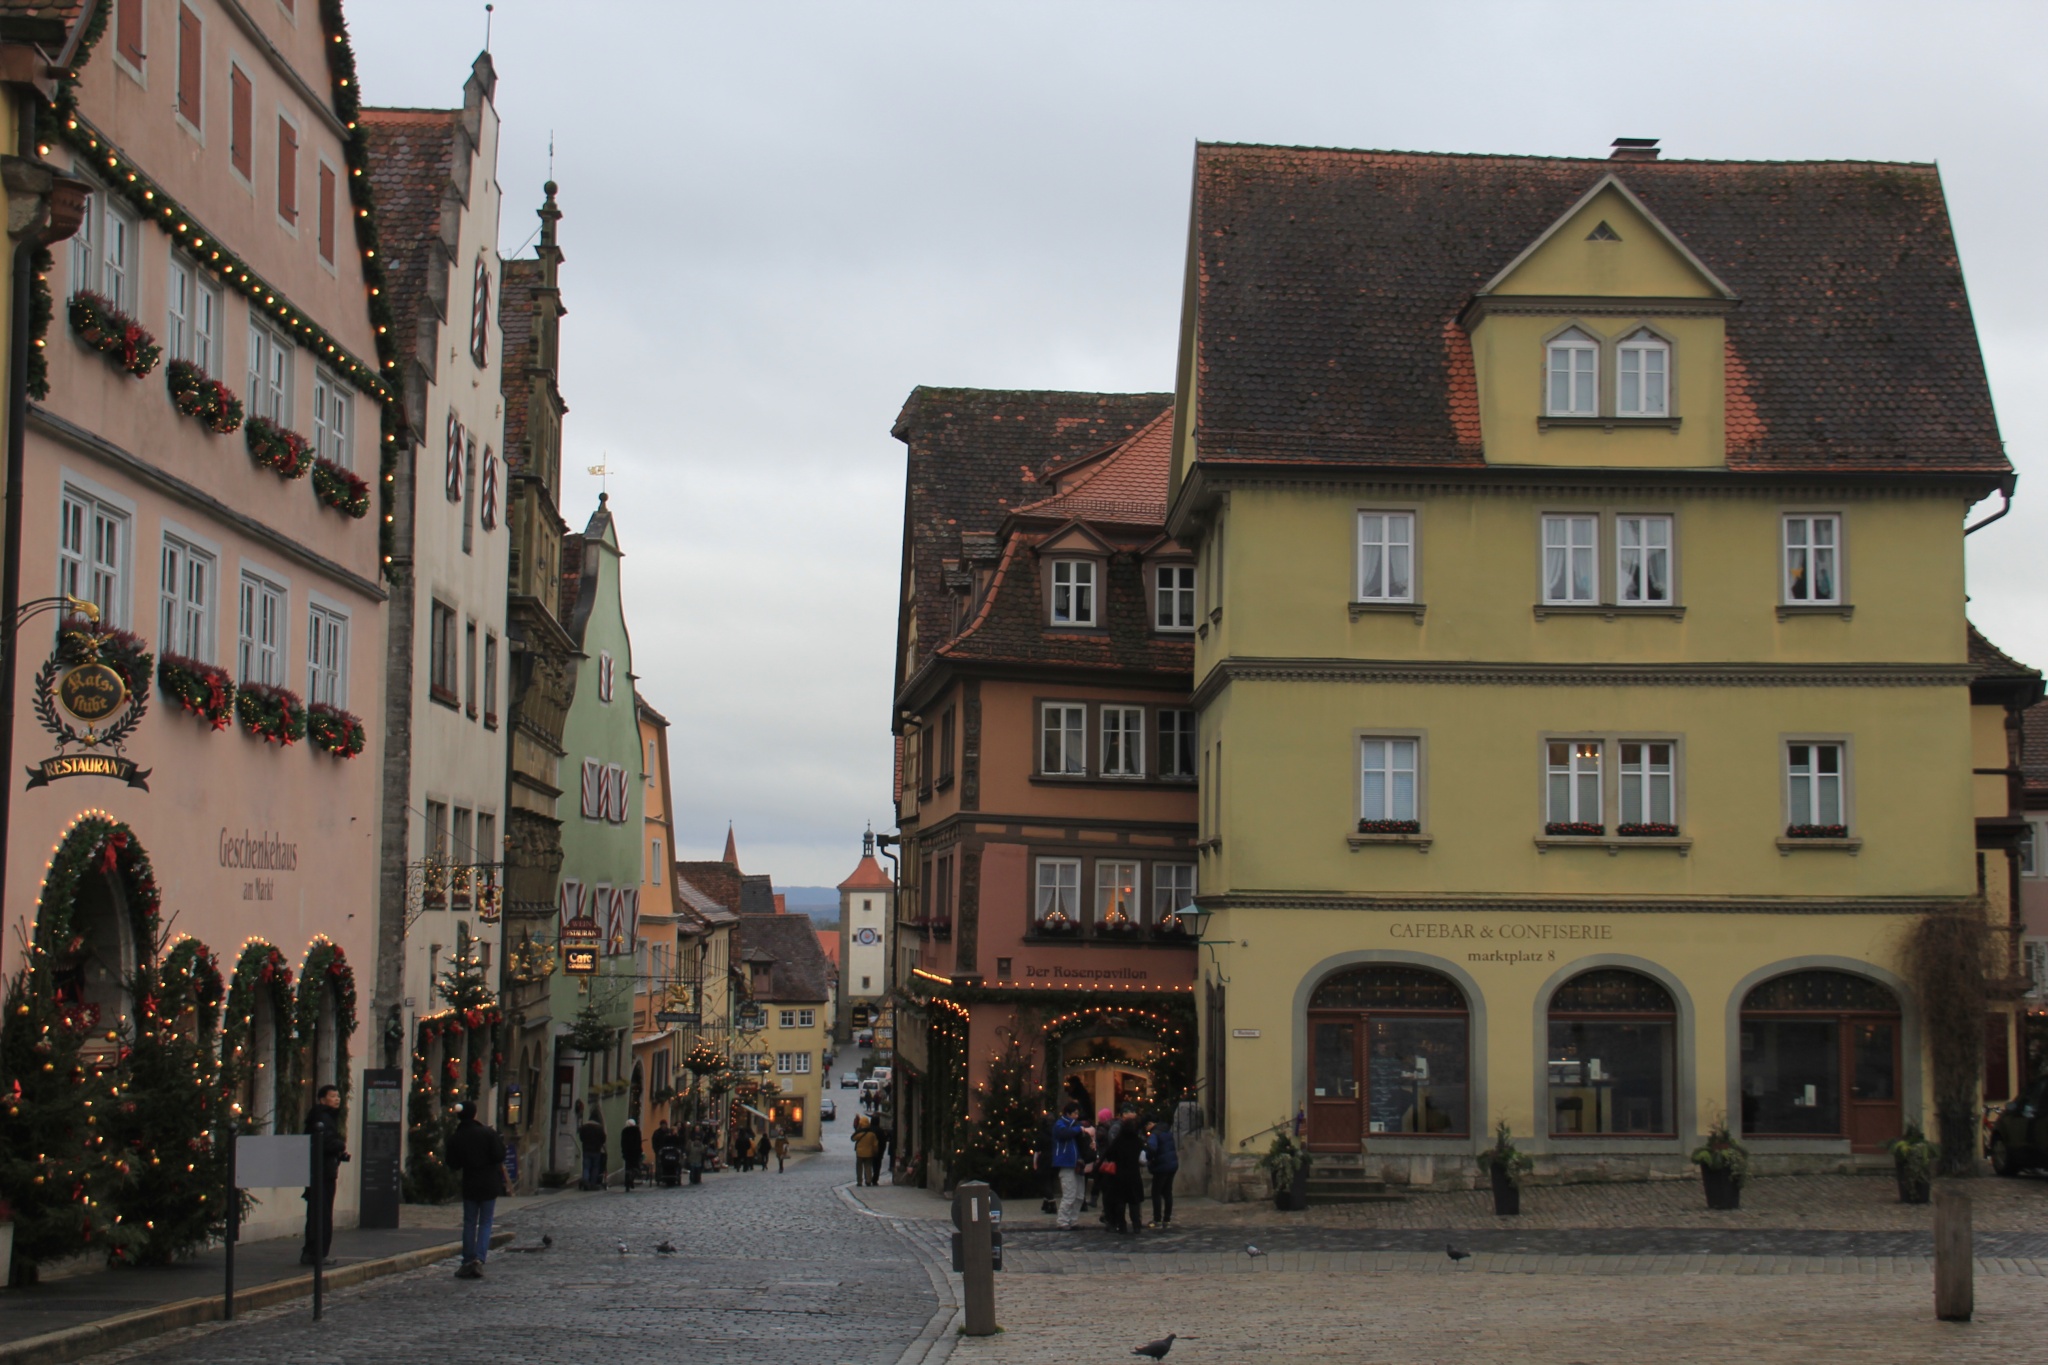 Rothenburg ob der Tauber is a well-preserved medieval town on Germany's Romantic Road.